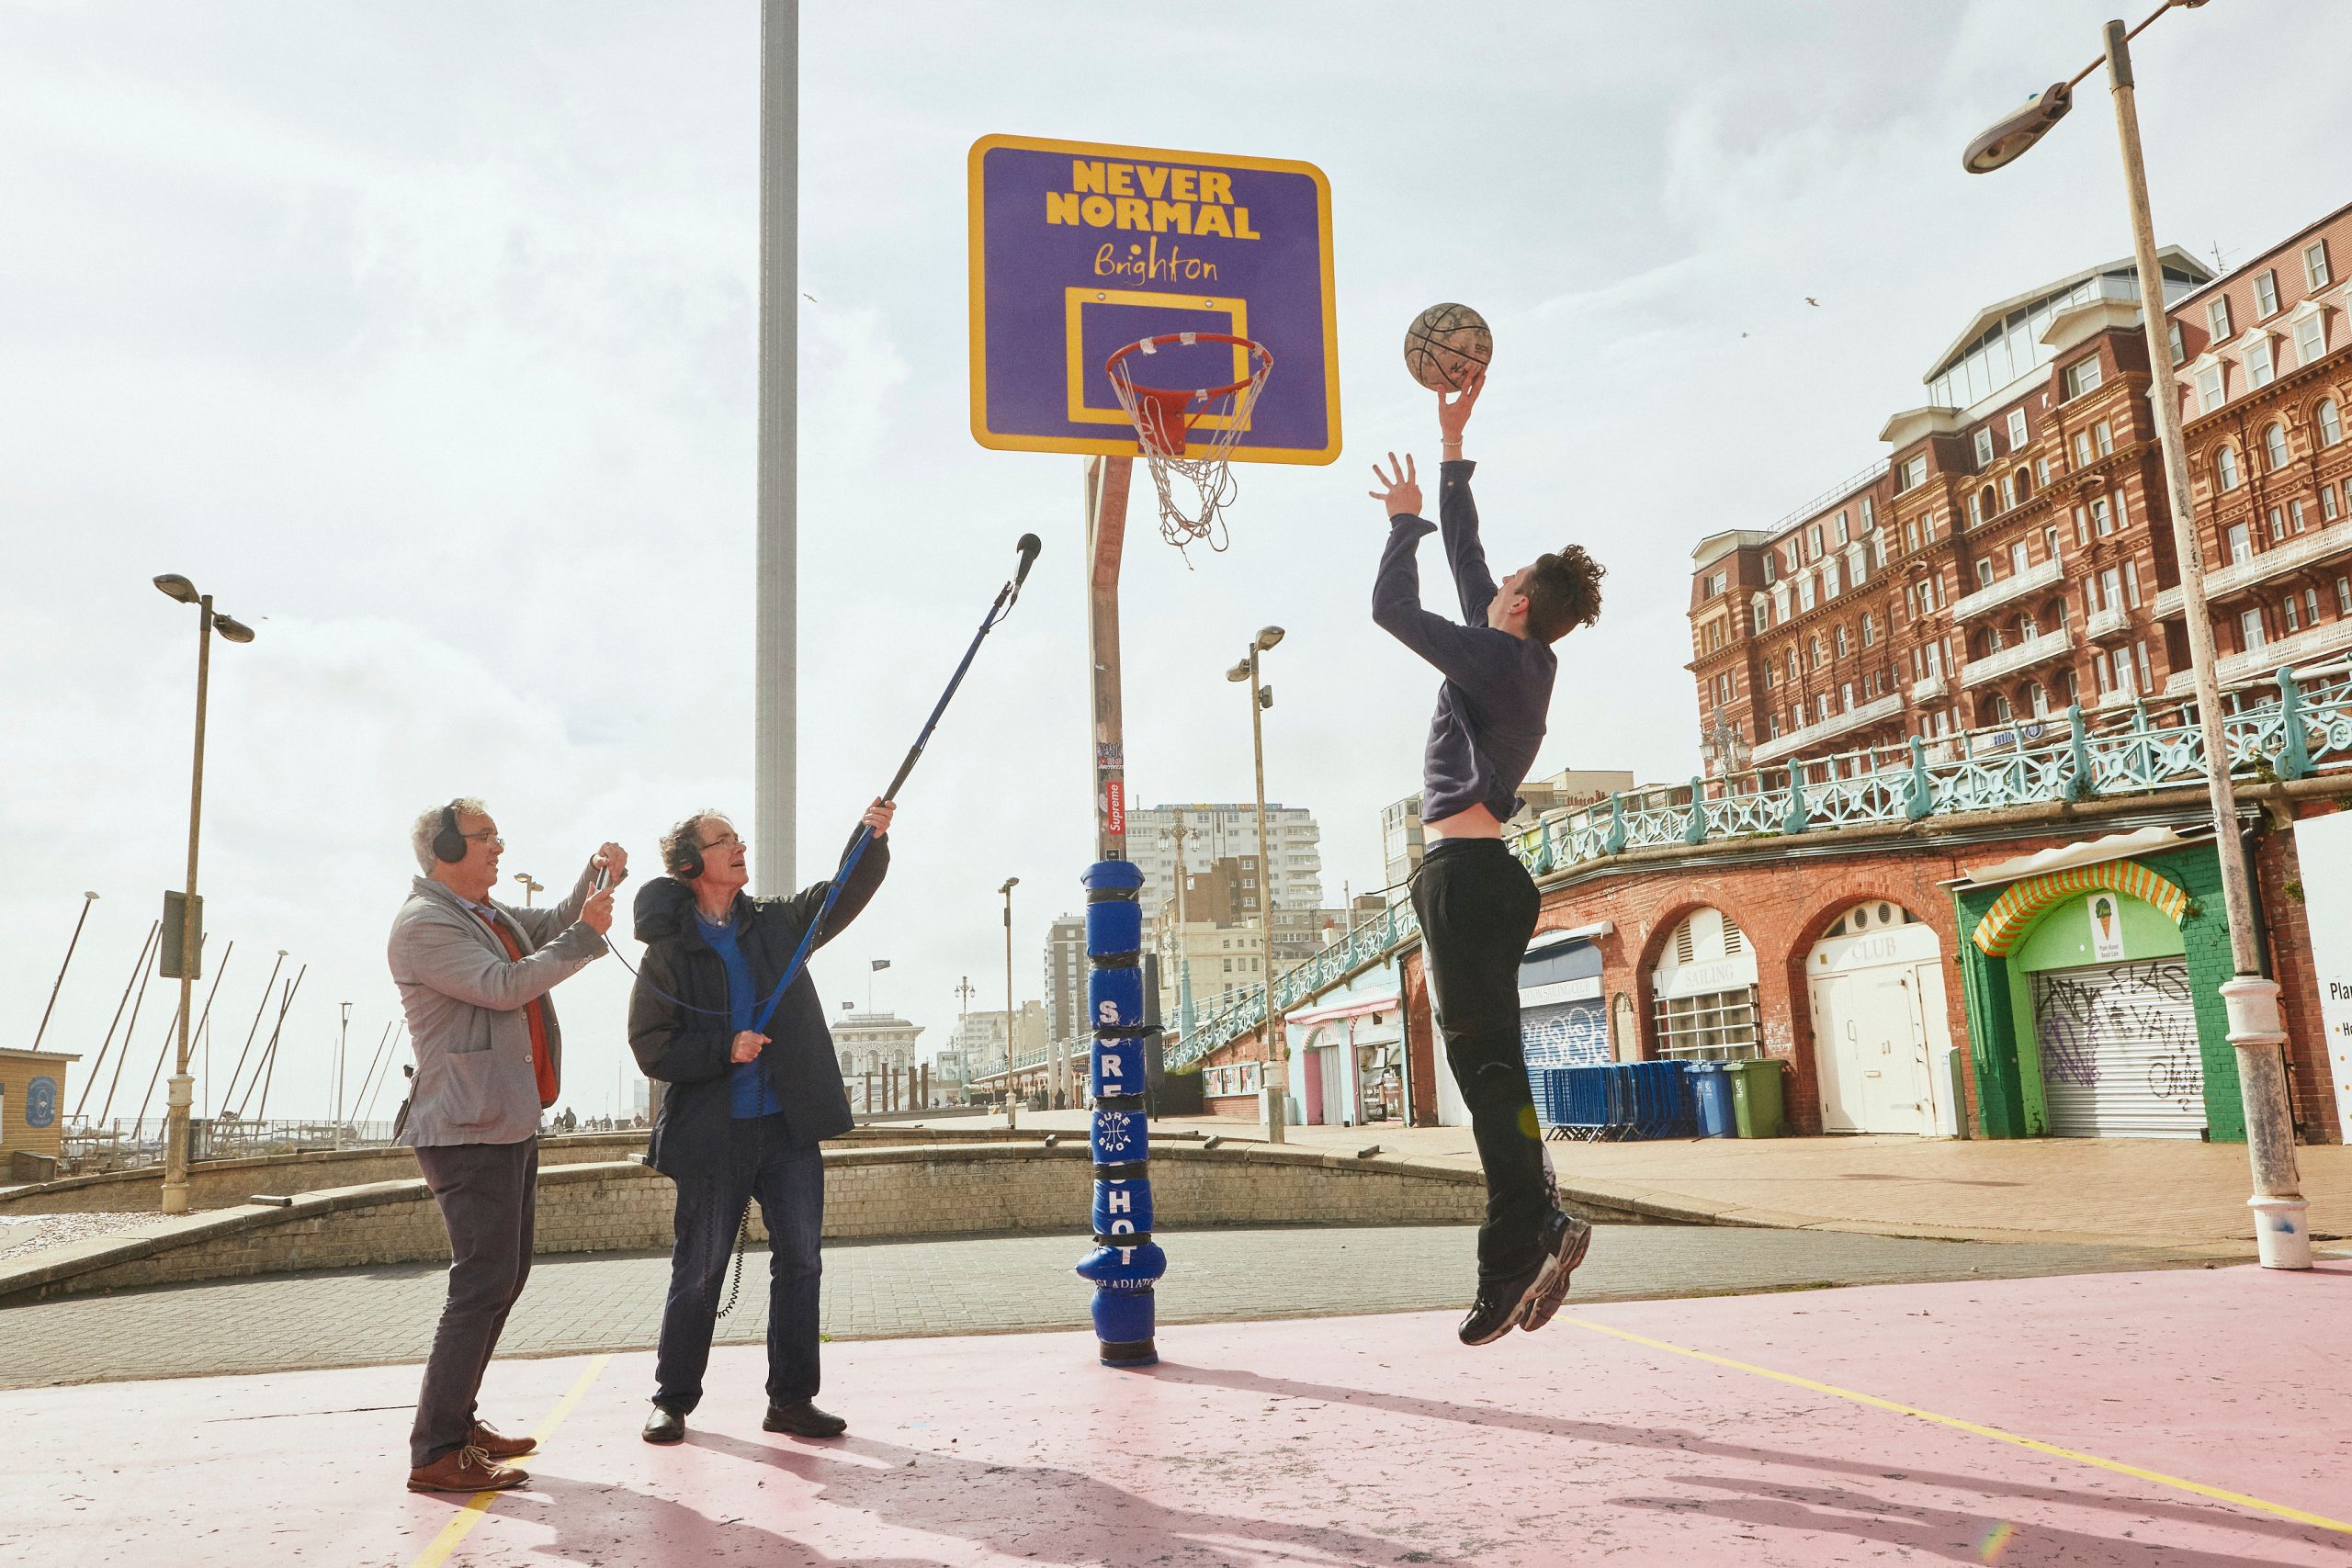 Man jumping in the air about to dunk a basketball into the net, on the right are two men one of which is holding up a microphone recording the sounds